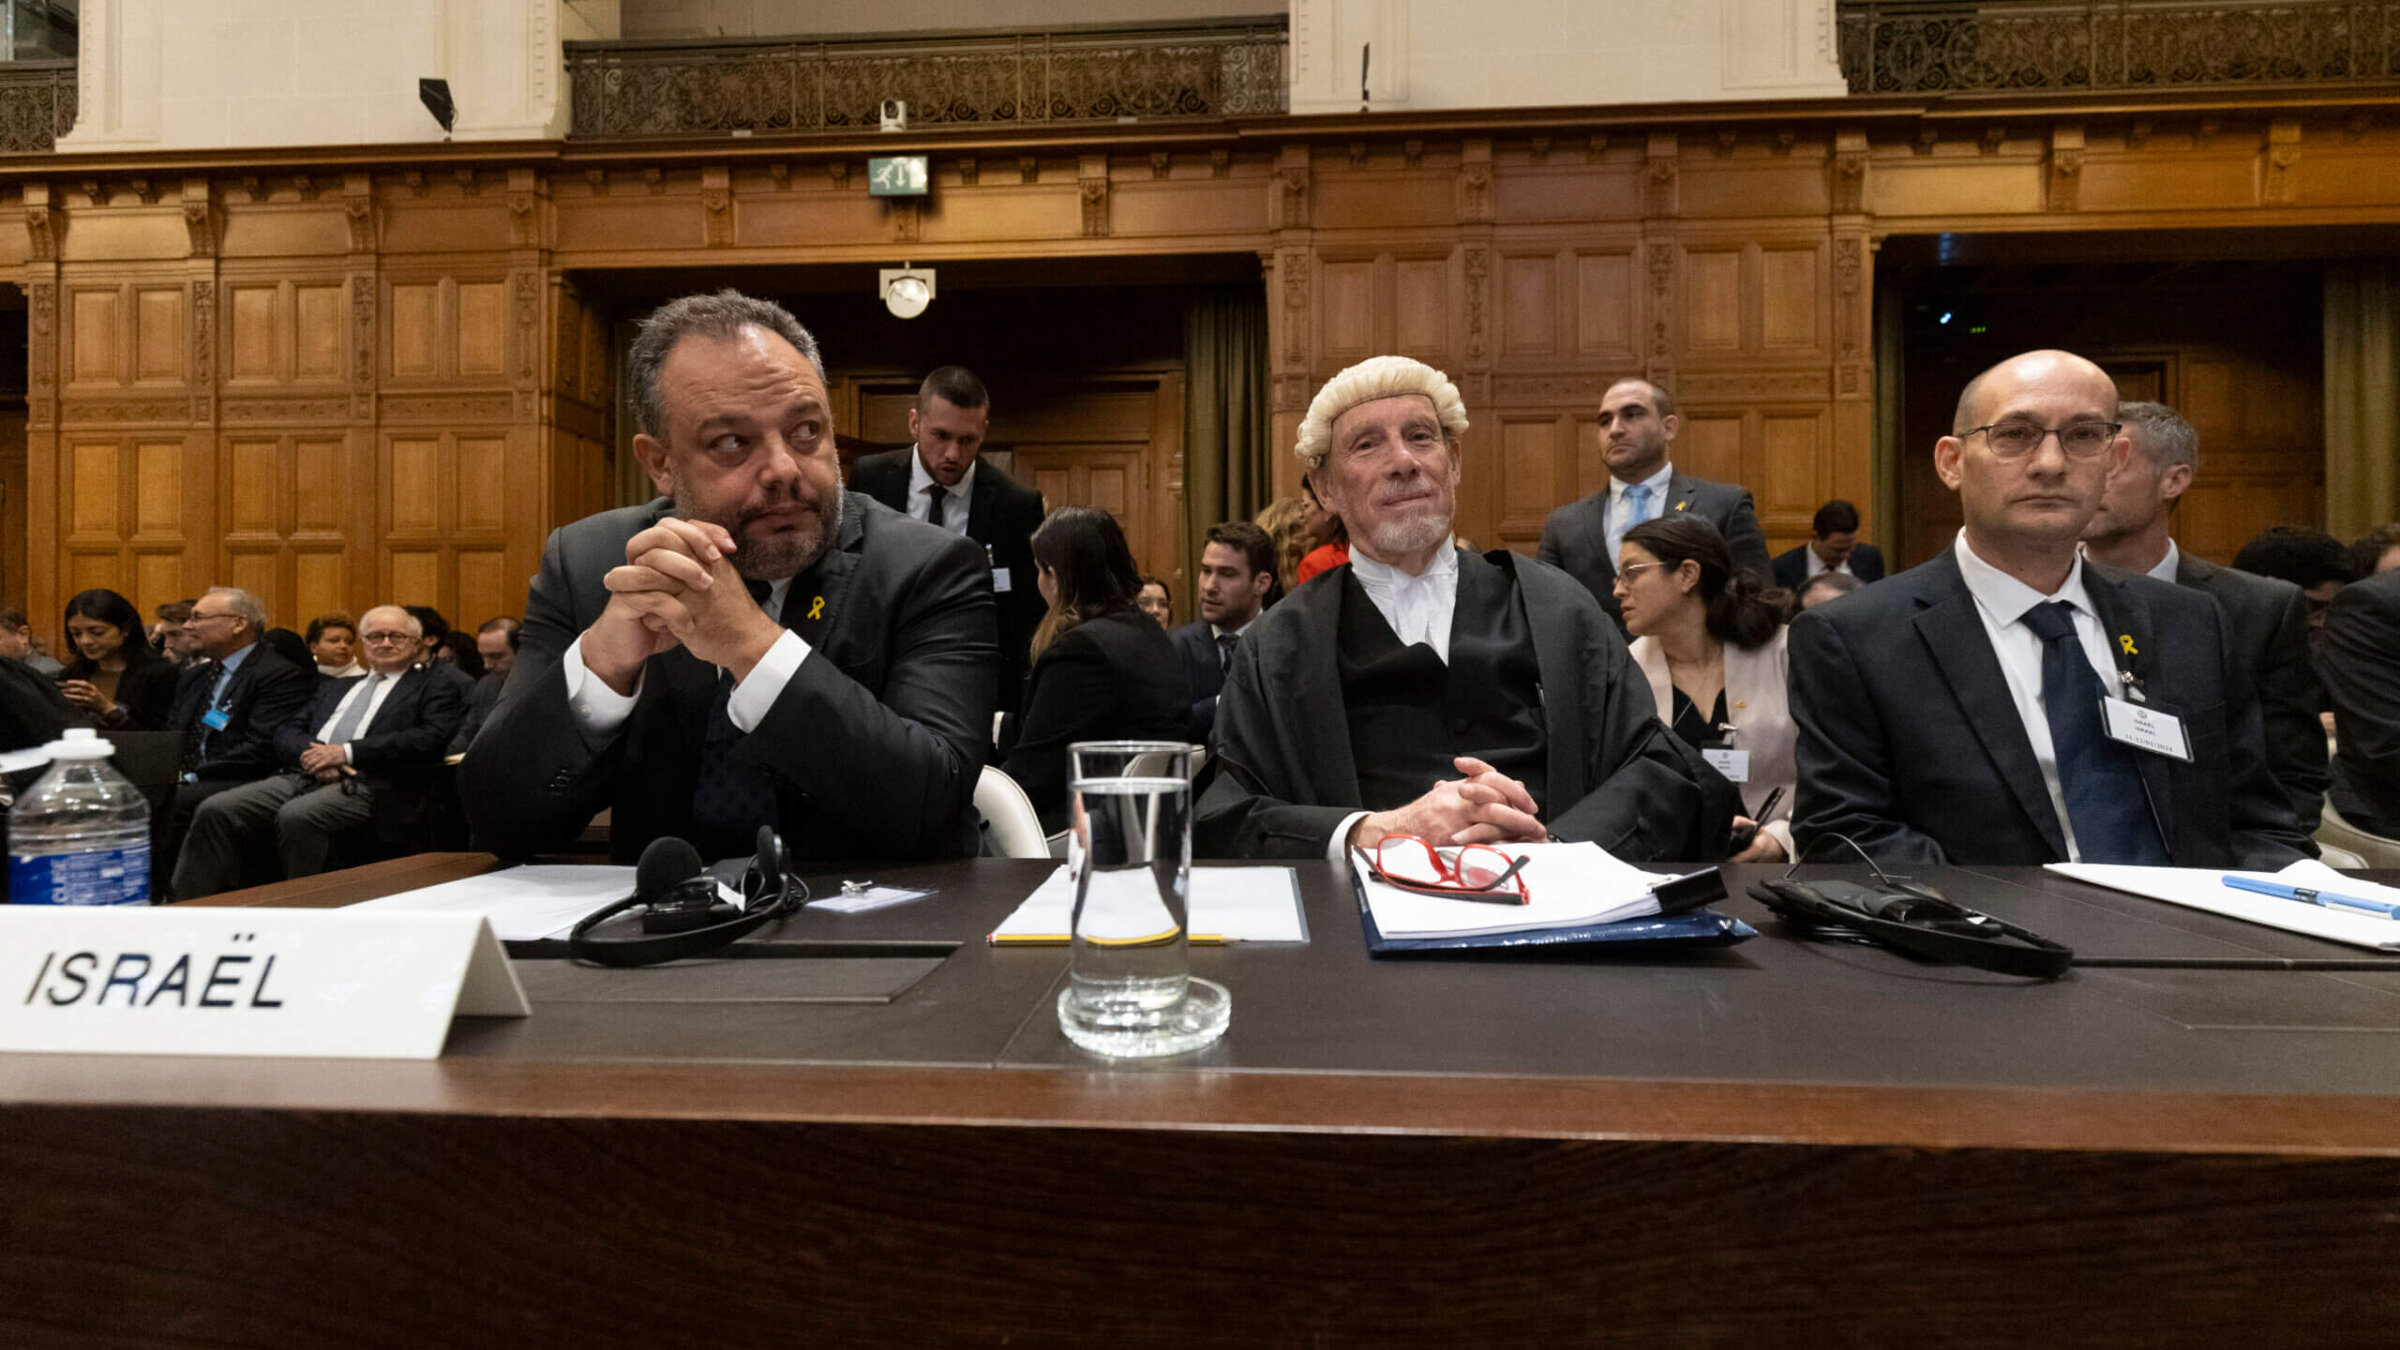 (L-R) Israeli legal counsellor Tal Becker, barrister Malcolm Shaw, and Gilad Noam wait to present Israel's argument before the International Court of Justice, Jan. 12, in The Hague, Netherlands. 